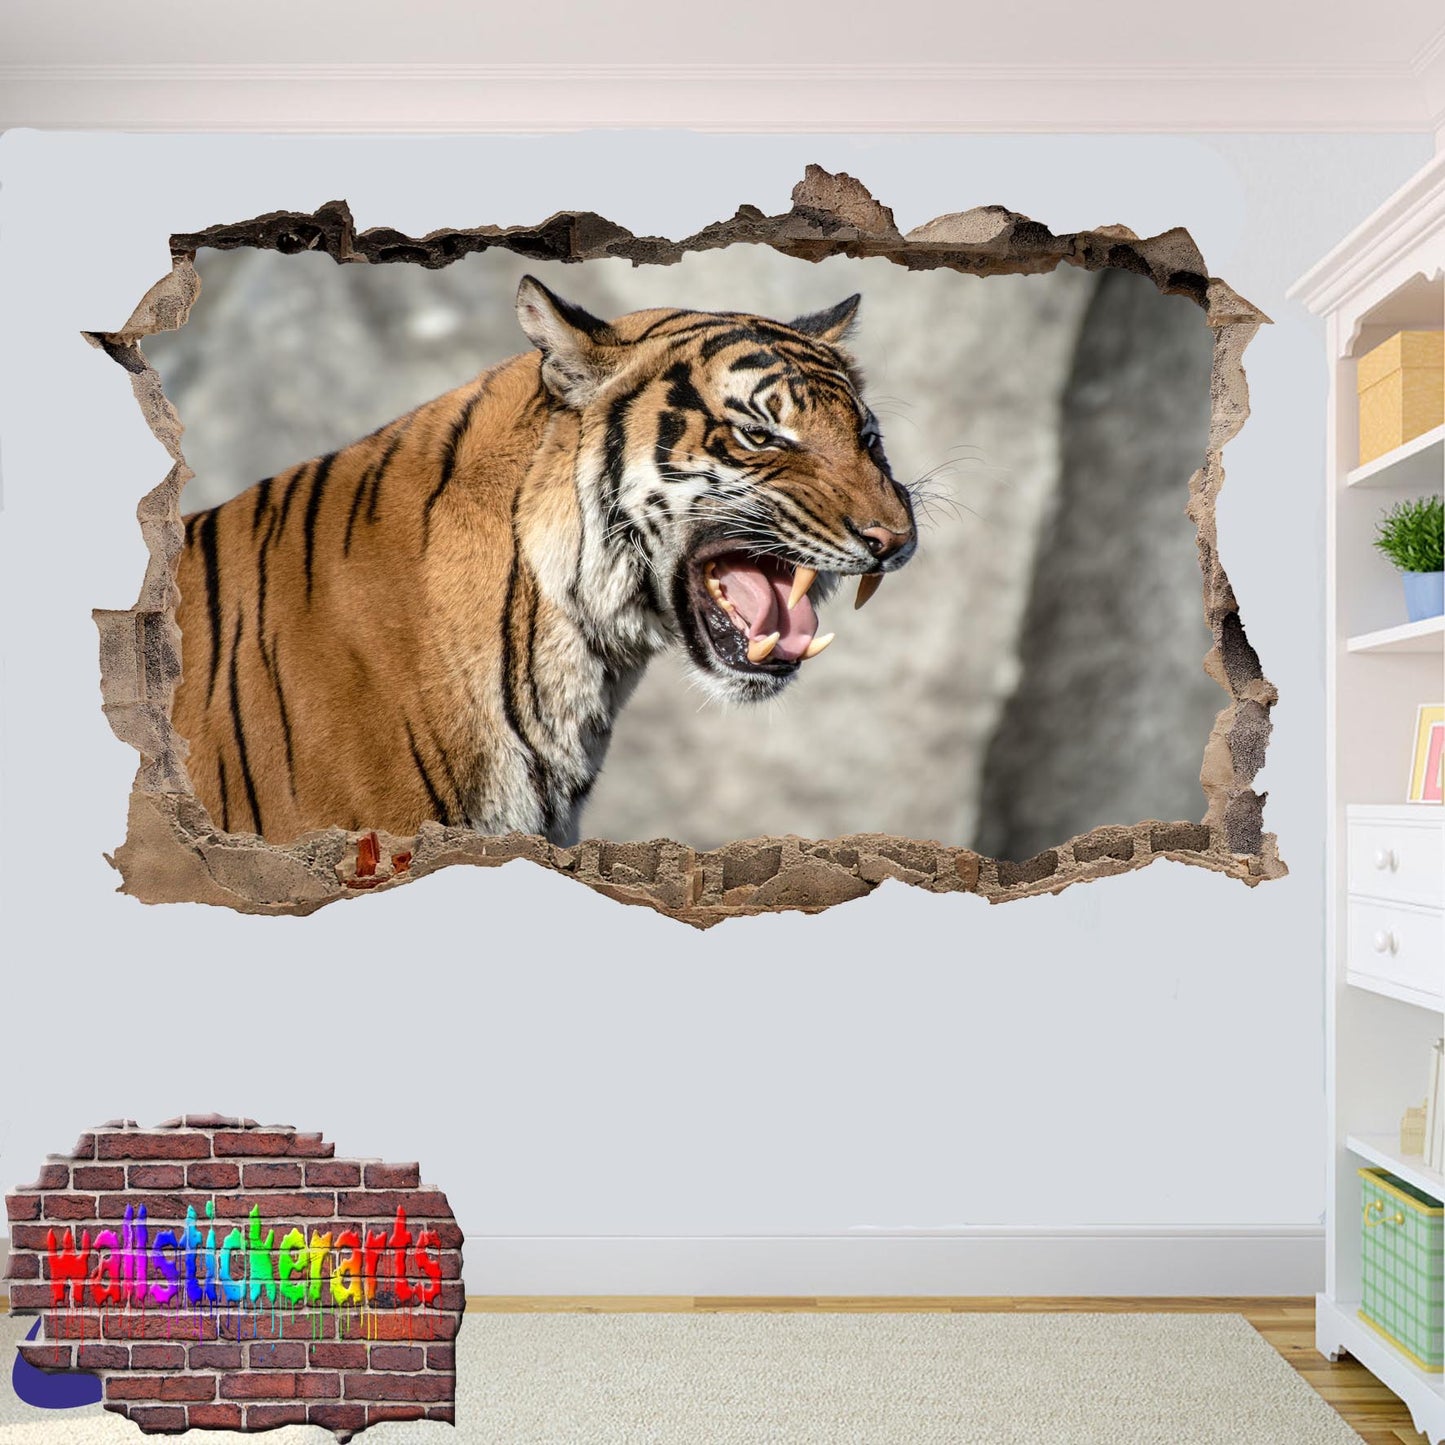 Wildlife Animals Tiger 3d Art Smashed Effect Wall Stickers Room Office Nursery Shop Decor Decal Mural